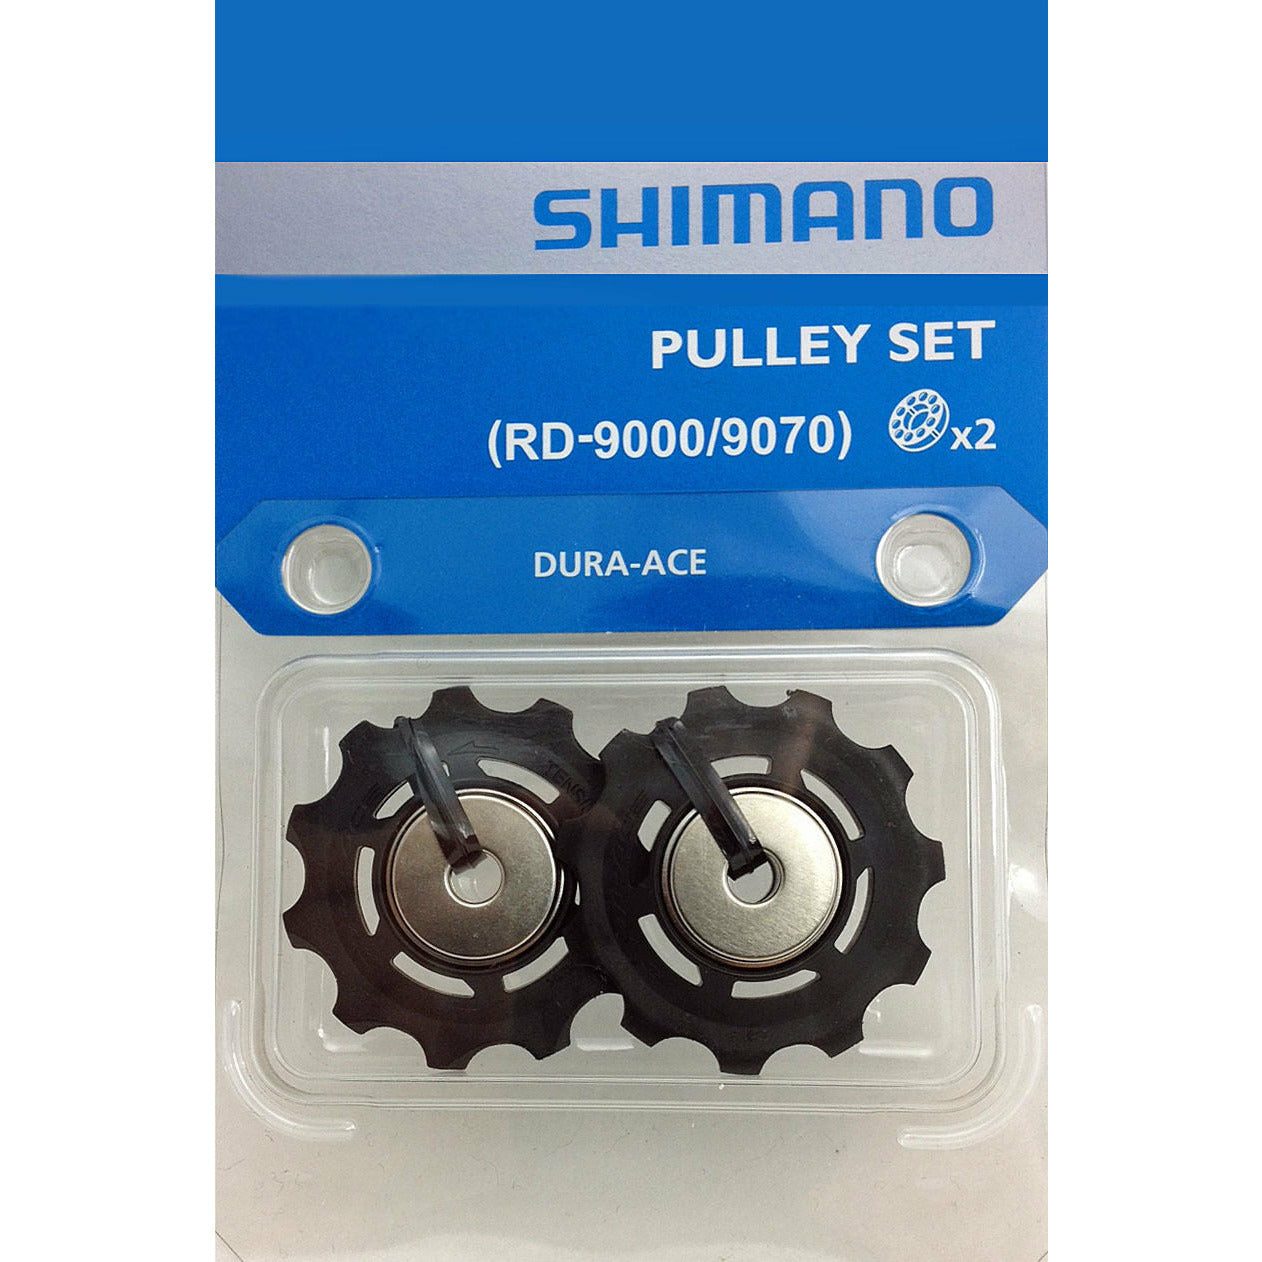 Shimano Dura Ace 9070 11 Speed Sealed Rear Derailleur Pulley Set RD-9070